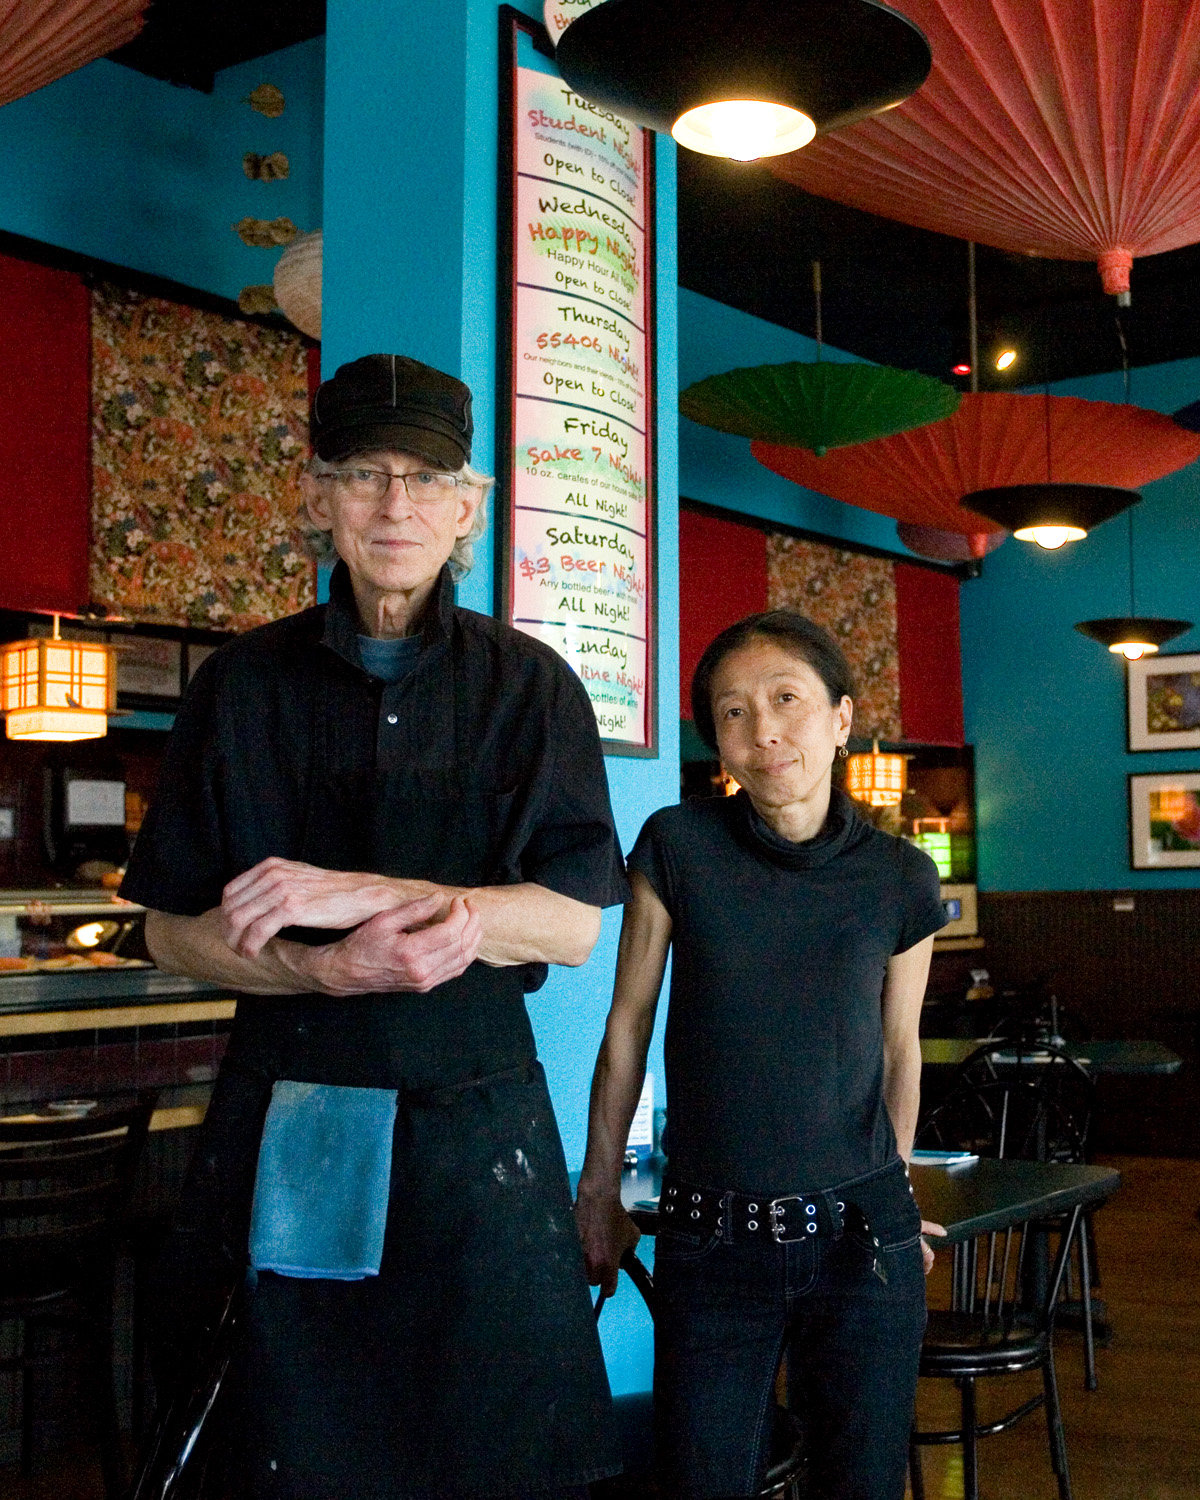 Midori Flomers (right), originally from Nagasaki, Japan, and John Flomers (left) originally from Brooklyn, N.Y., pictured in their former restaurant. They will be re-opening in a new Longfellow location as soon as they are able. In the meantime, find their take-out at the Seward Café Friday through Sunday evenings until further notice. (Photo by Margie O’Loughlin)